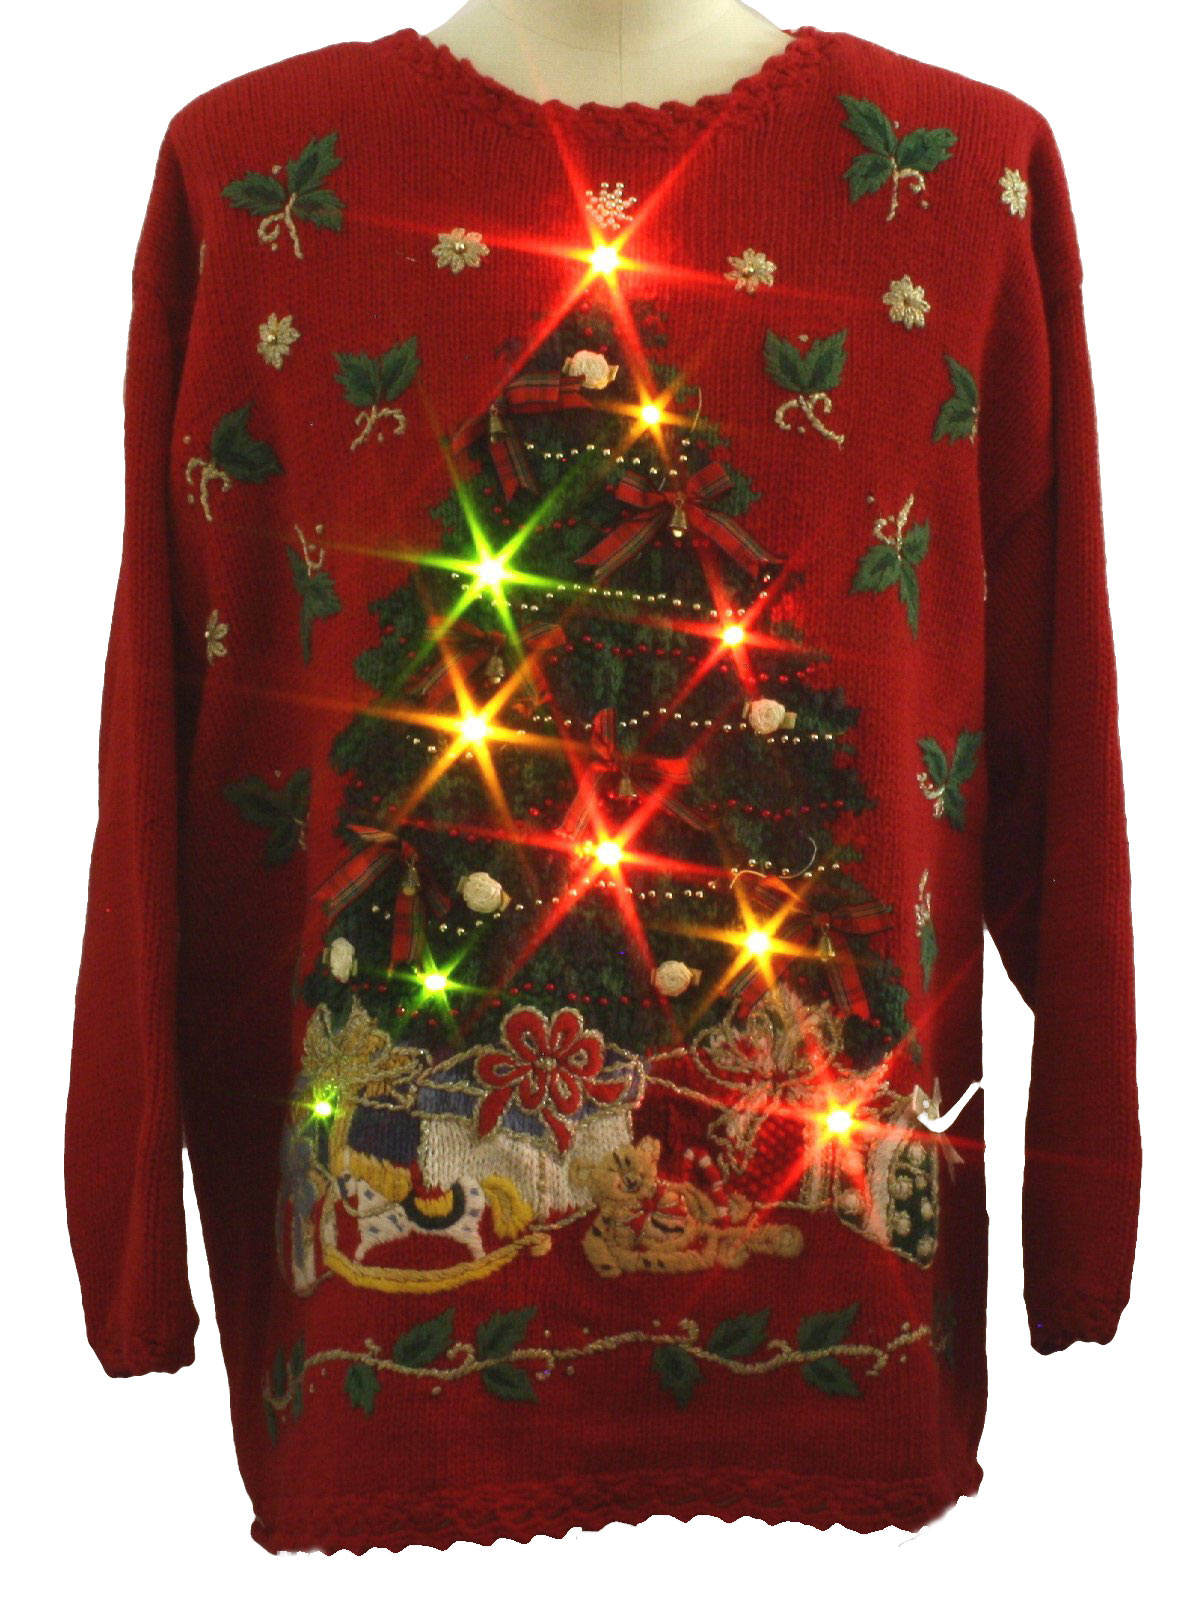 Lightup Ugly Christmas Sweater: -Capistrano- Unisex red, blue, green ...